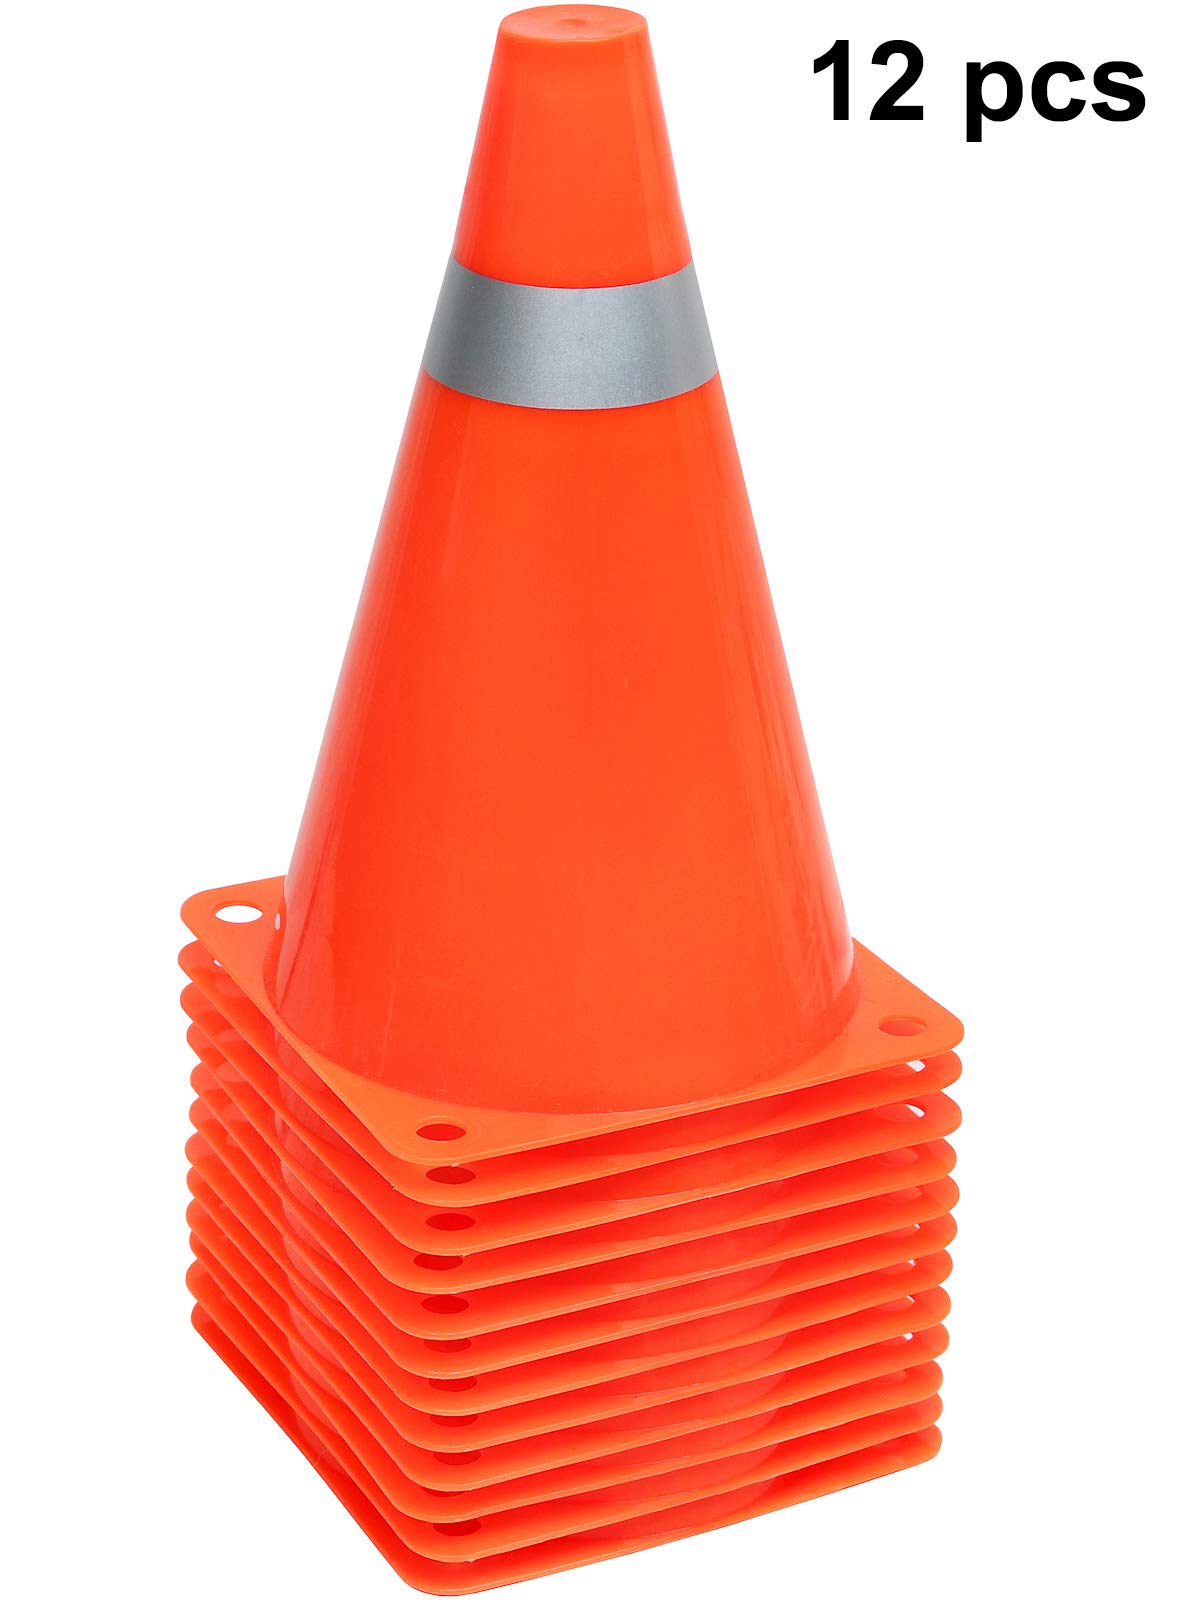 7 Inch Traffic Cones Sports Soccer Drills Agility Training Orange Cones for Kids - Opticdeals